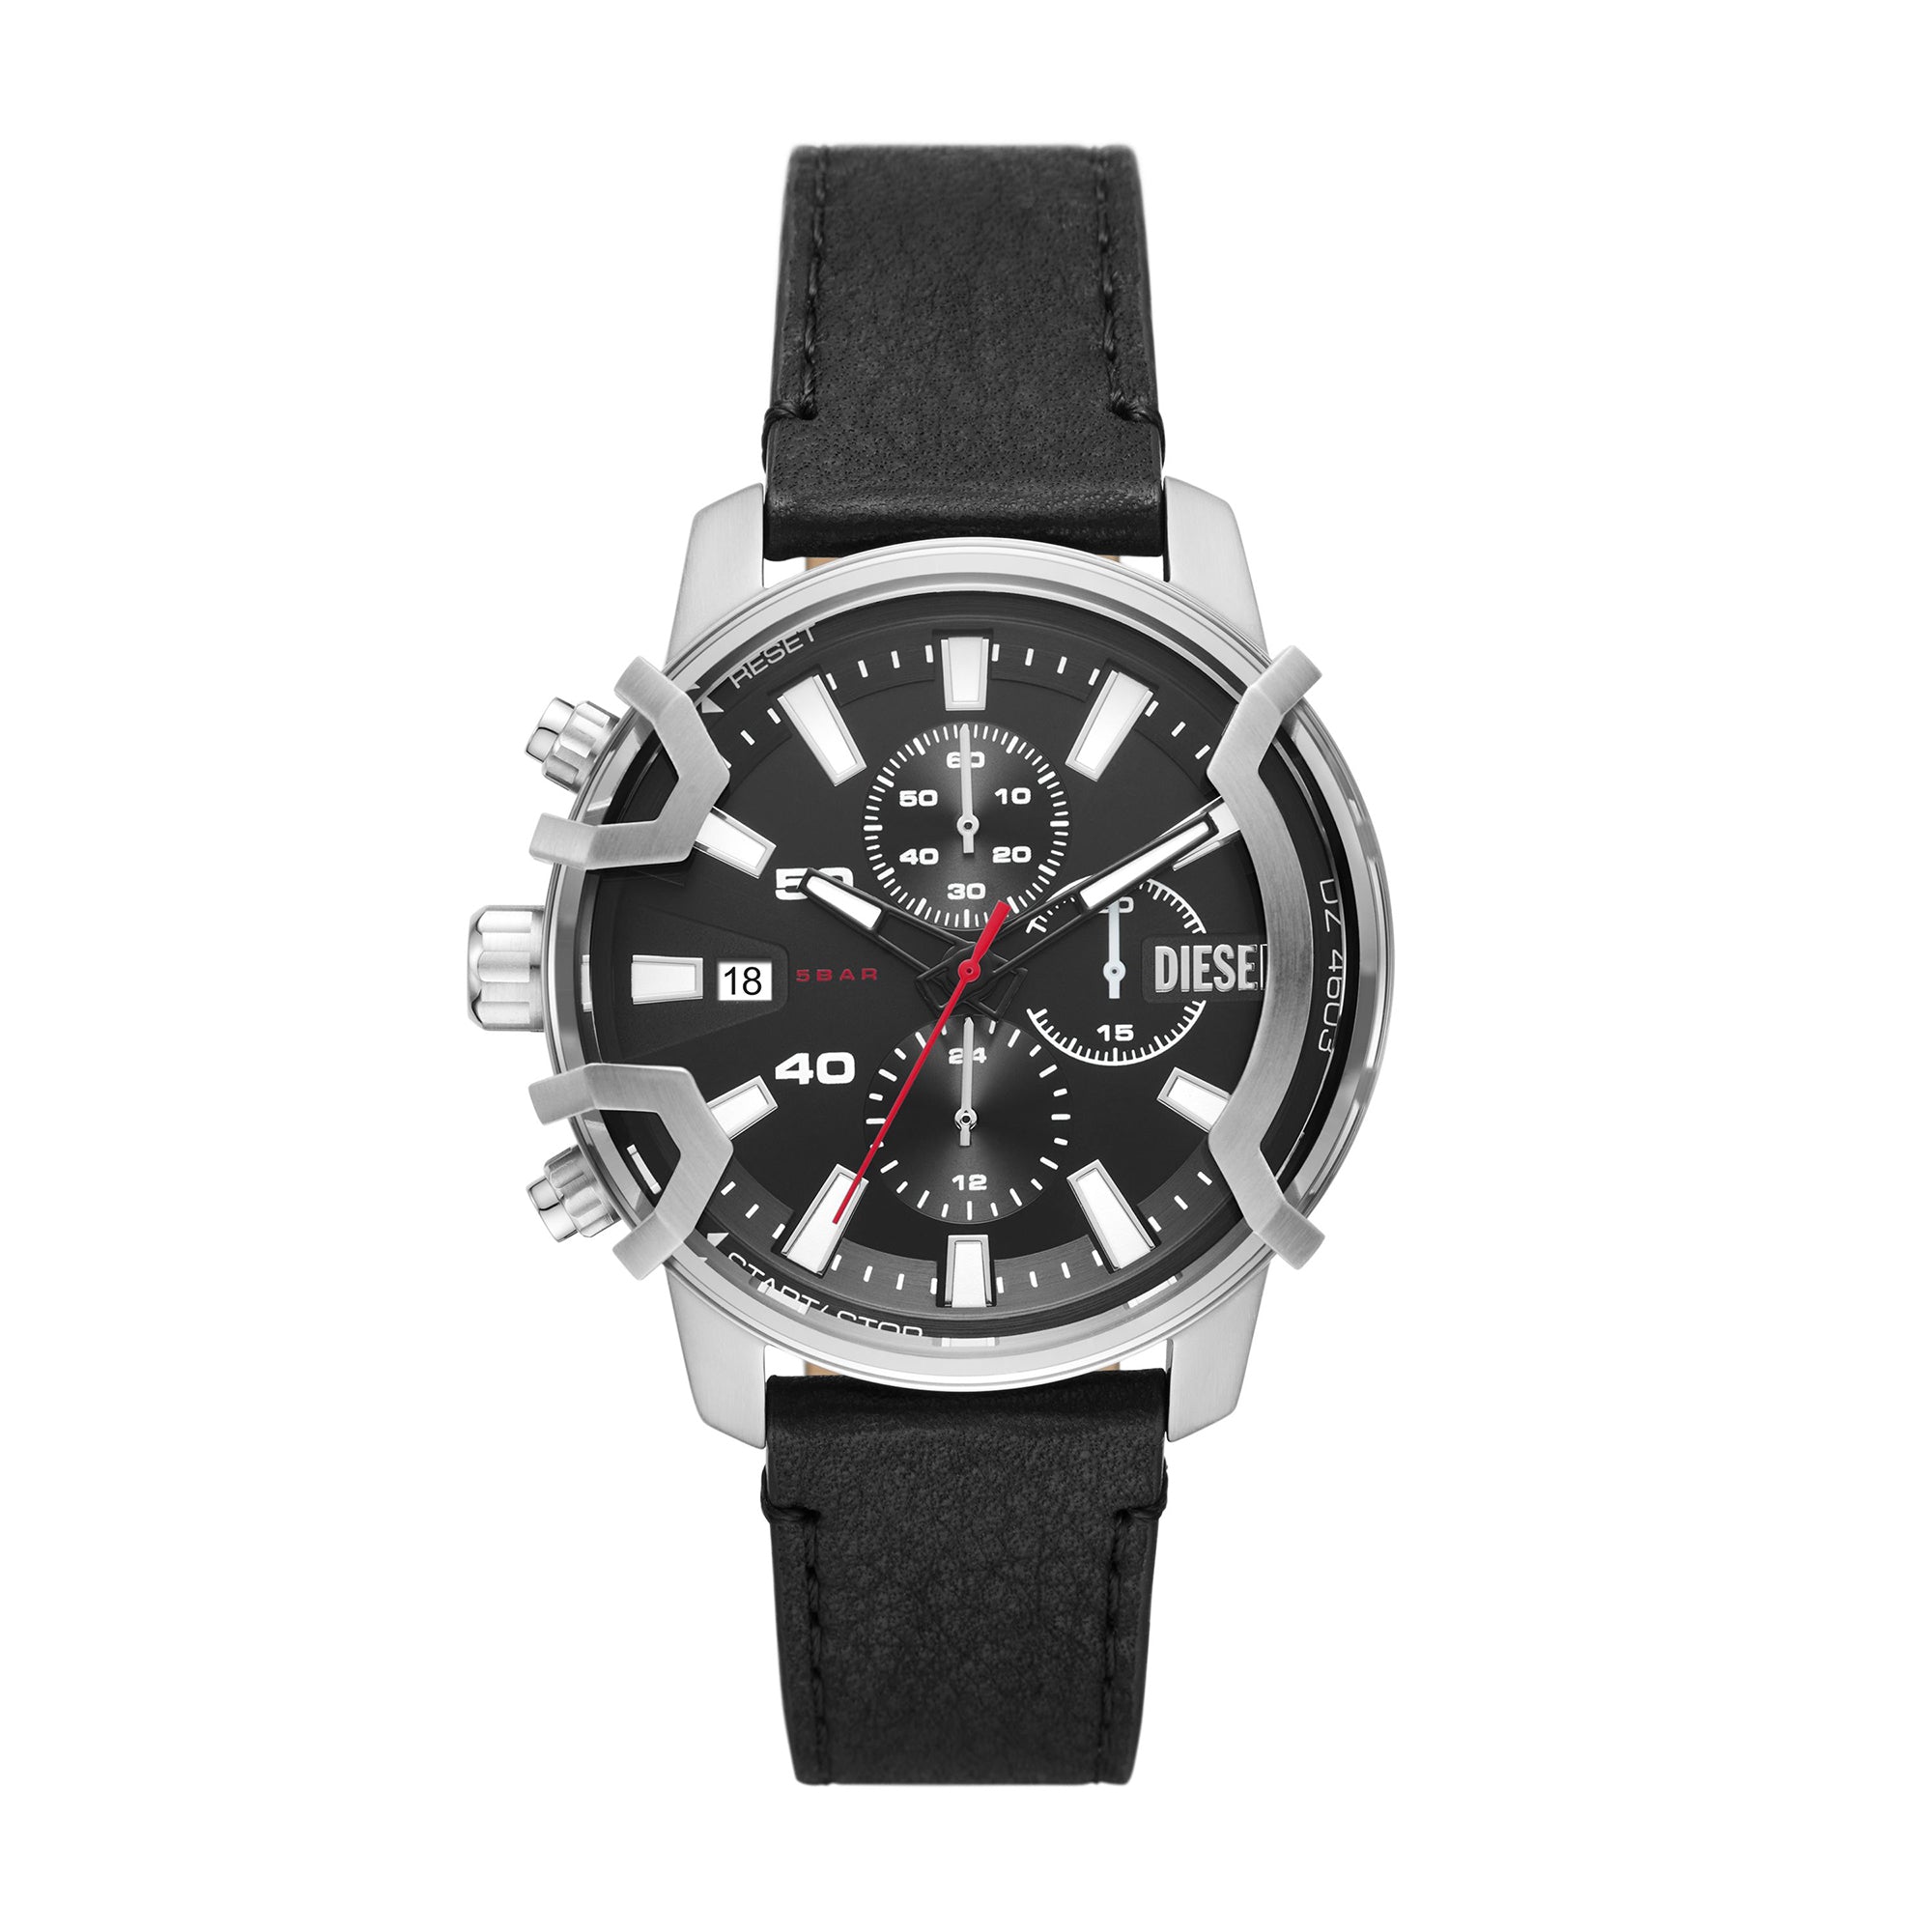 DIESEL CLASSIC DIESEL GRIFFED M LEATHER BLACK – CHRONOGRAPH The House Watch WATCHGRIFFED